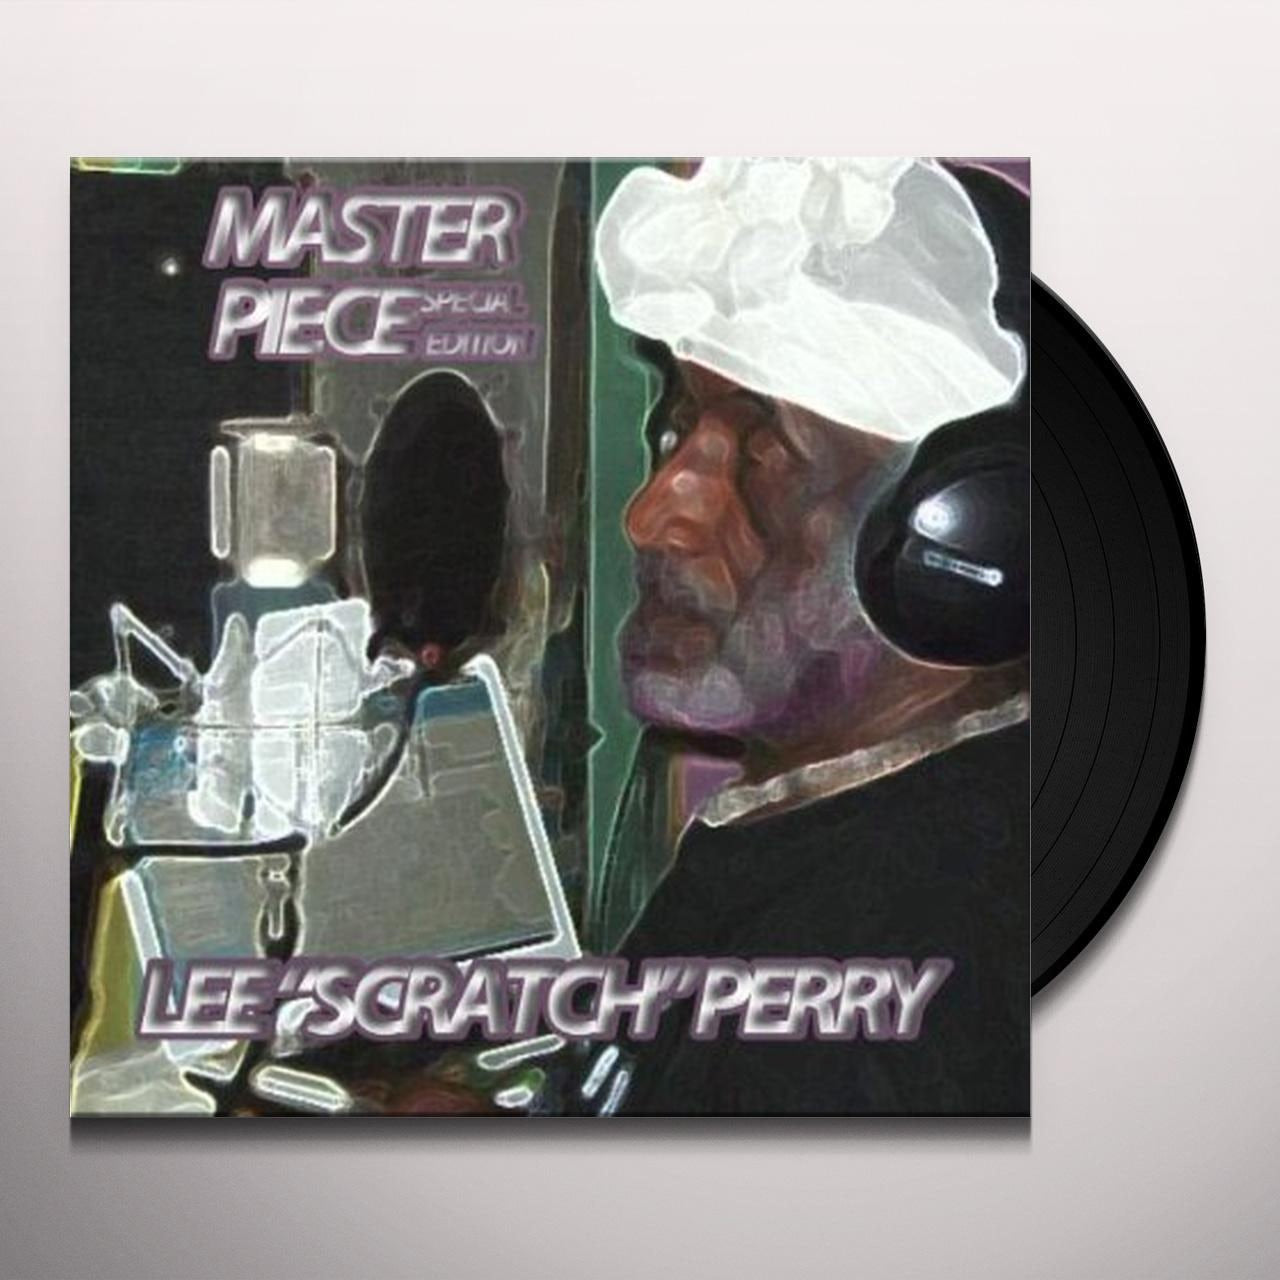 Lee “Scratch” Perry – Master Piece | Special Edition